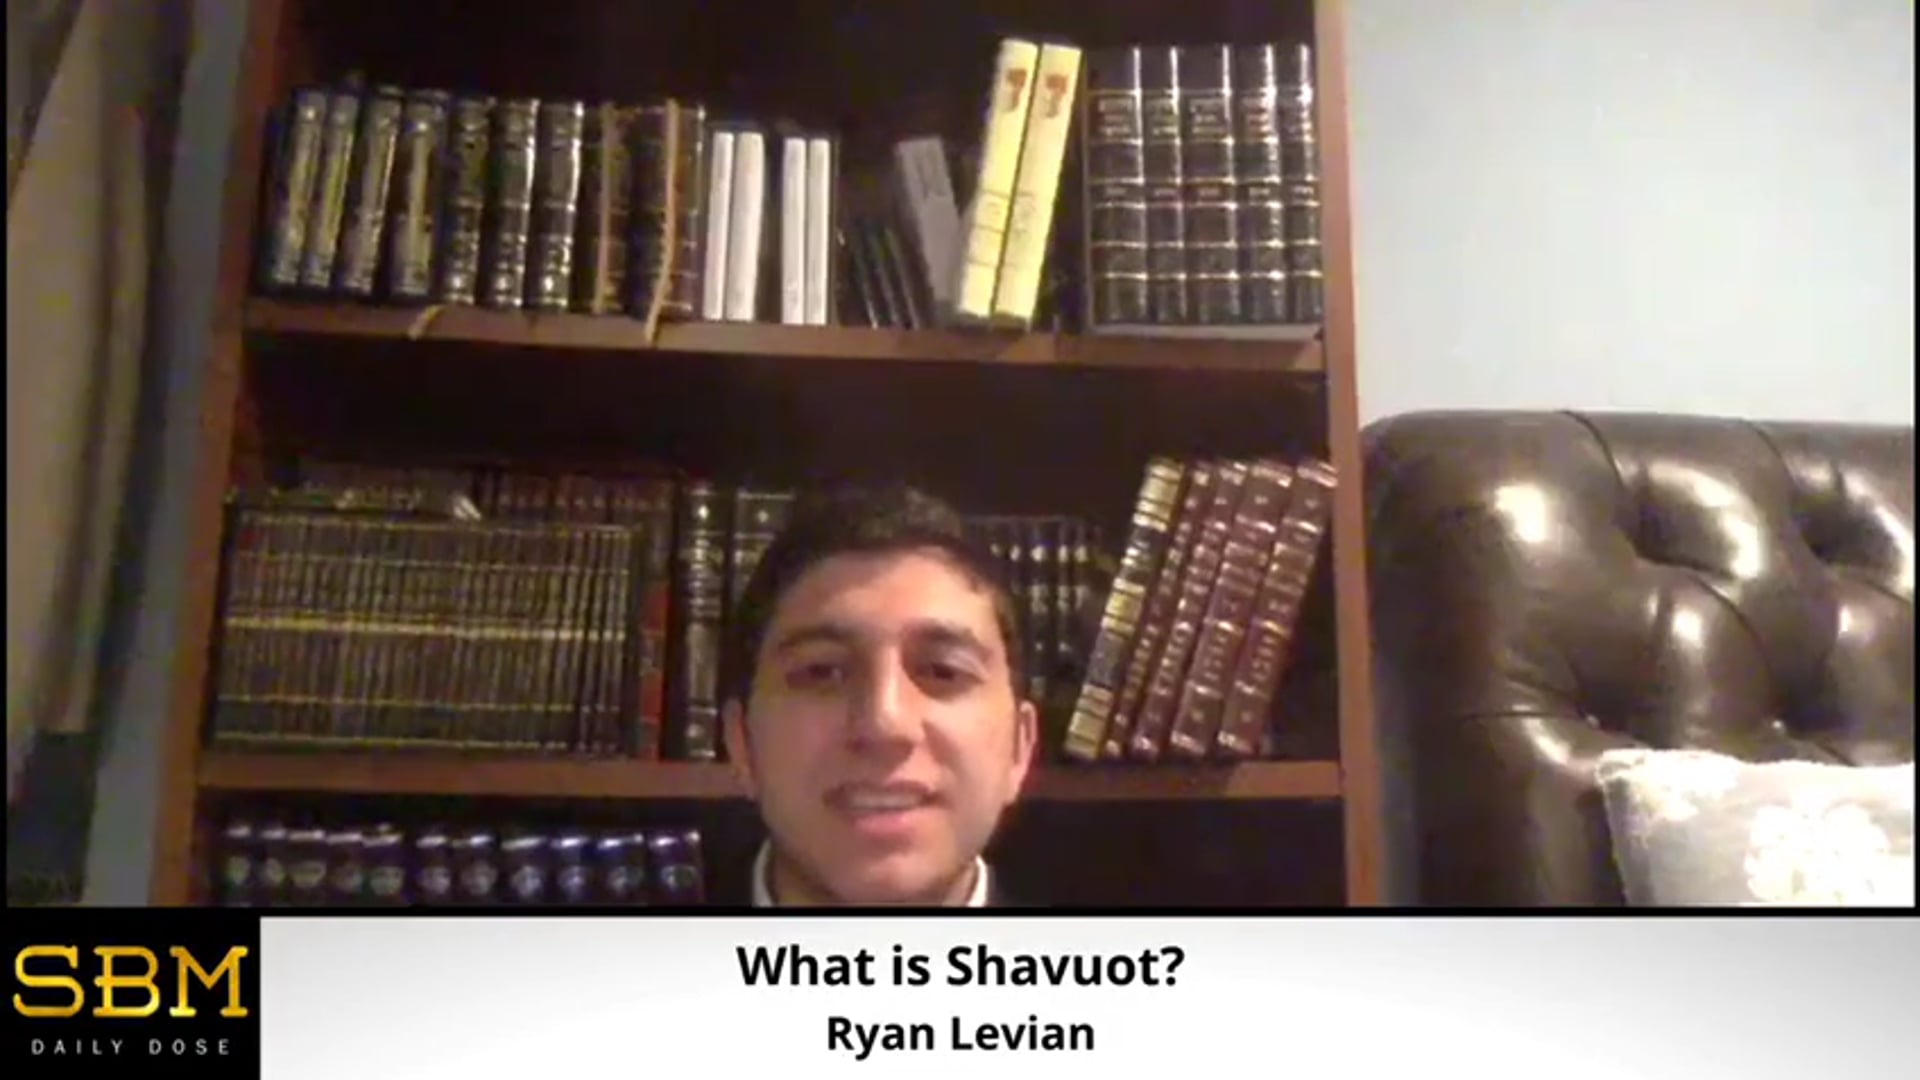 What is Shavuot? - Ryan Levian